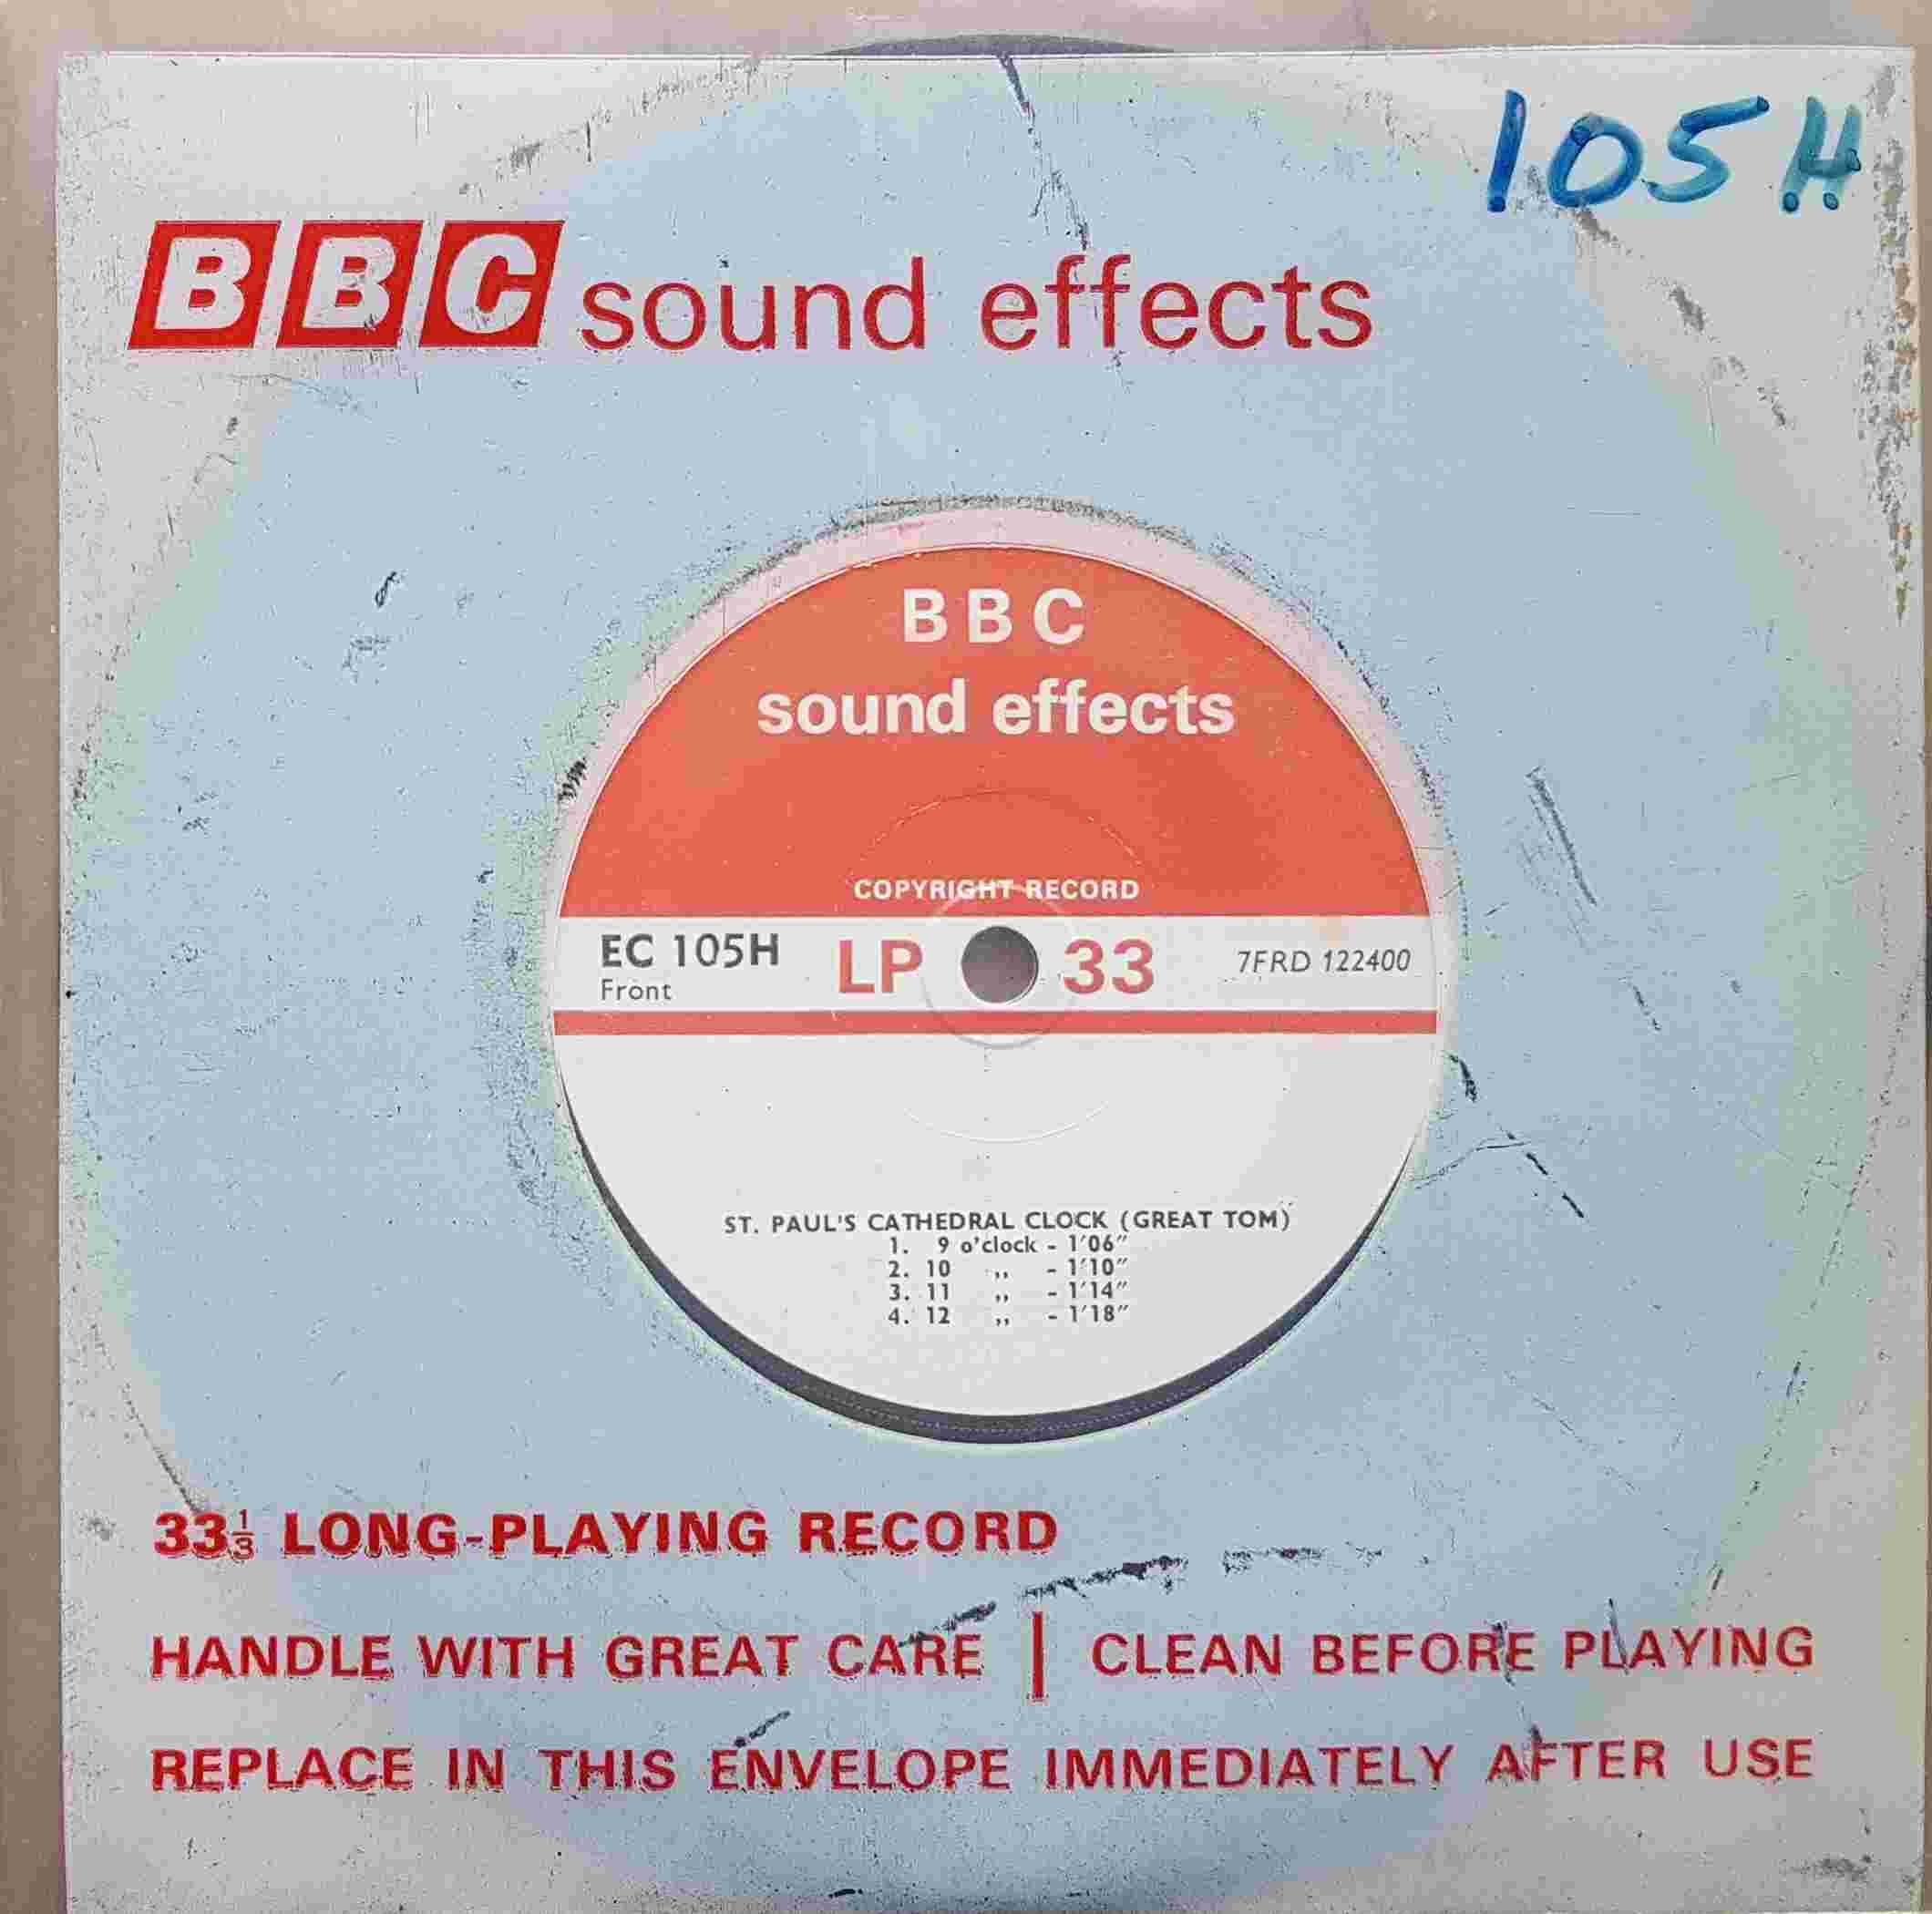 Picture of EC 105H St.Paul's Cathedral clock (Great Tom) by artist Not registered from the BBC singles - Records and Tapes library